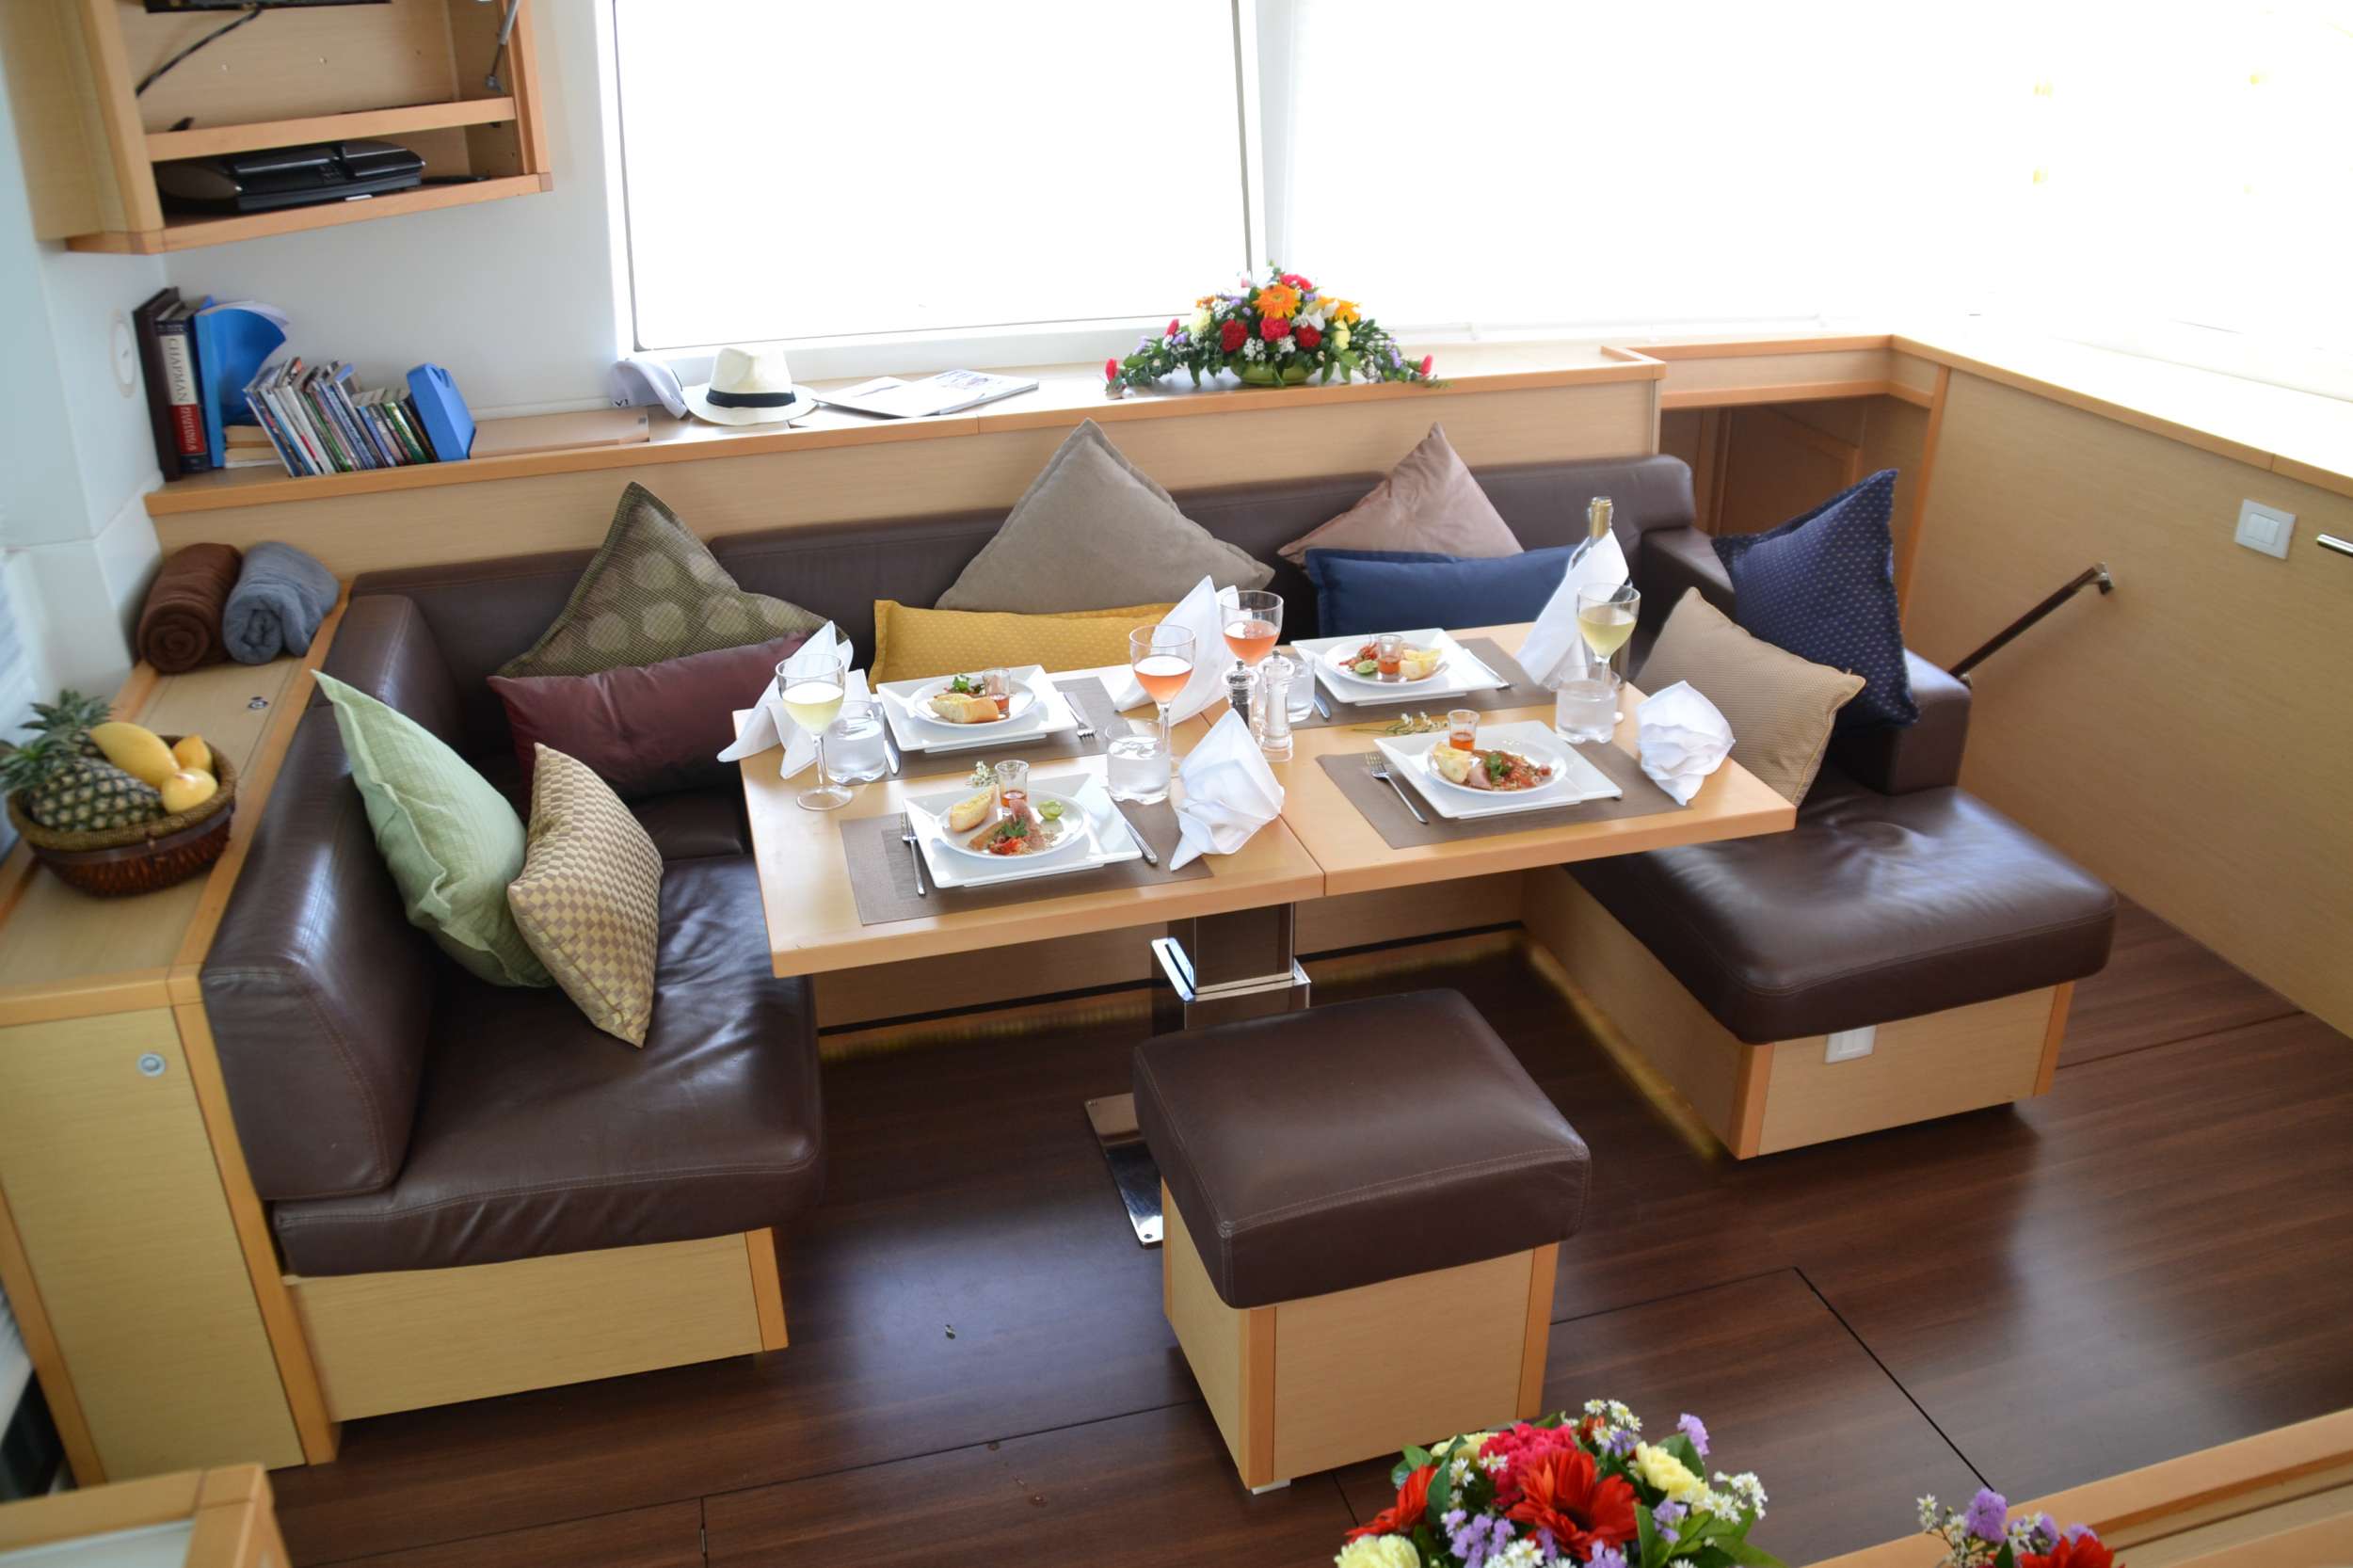 00SEVEN - Luxury yacht charter Thailand & Boat hire in SE Asia 3